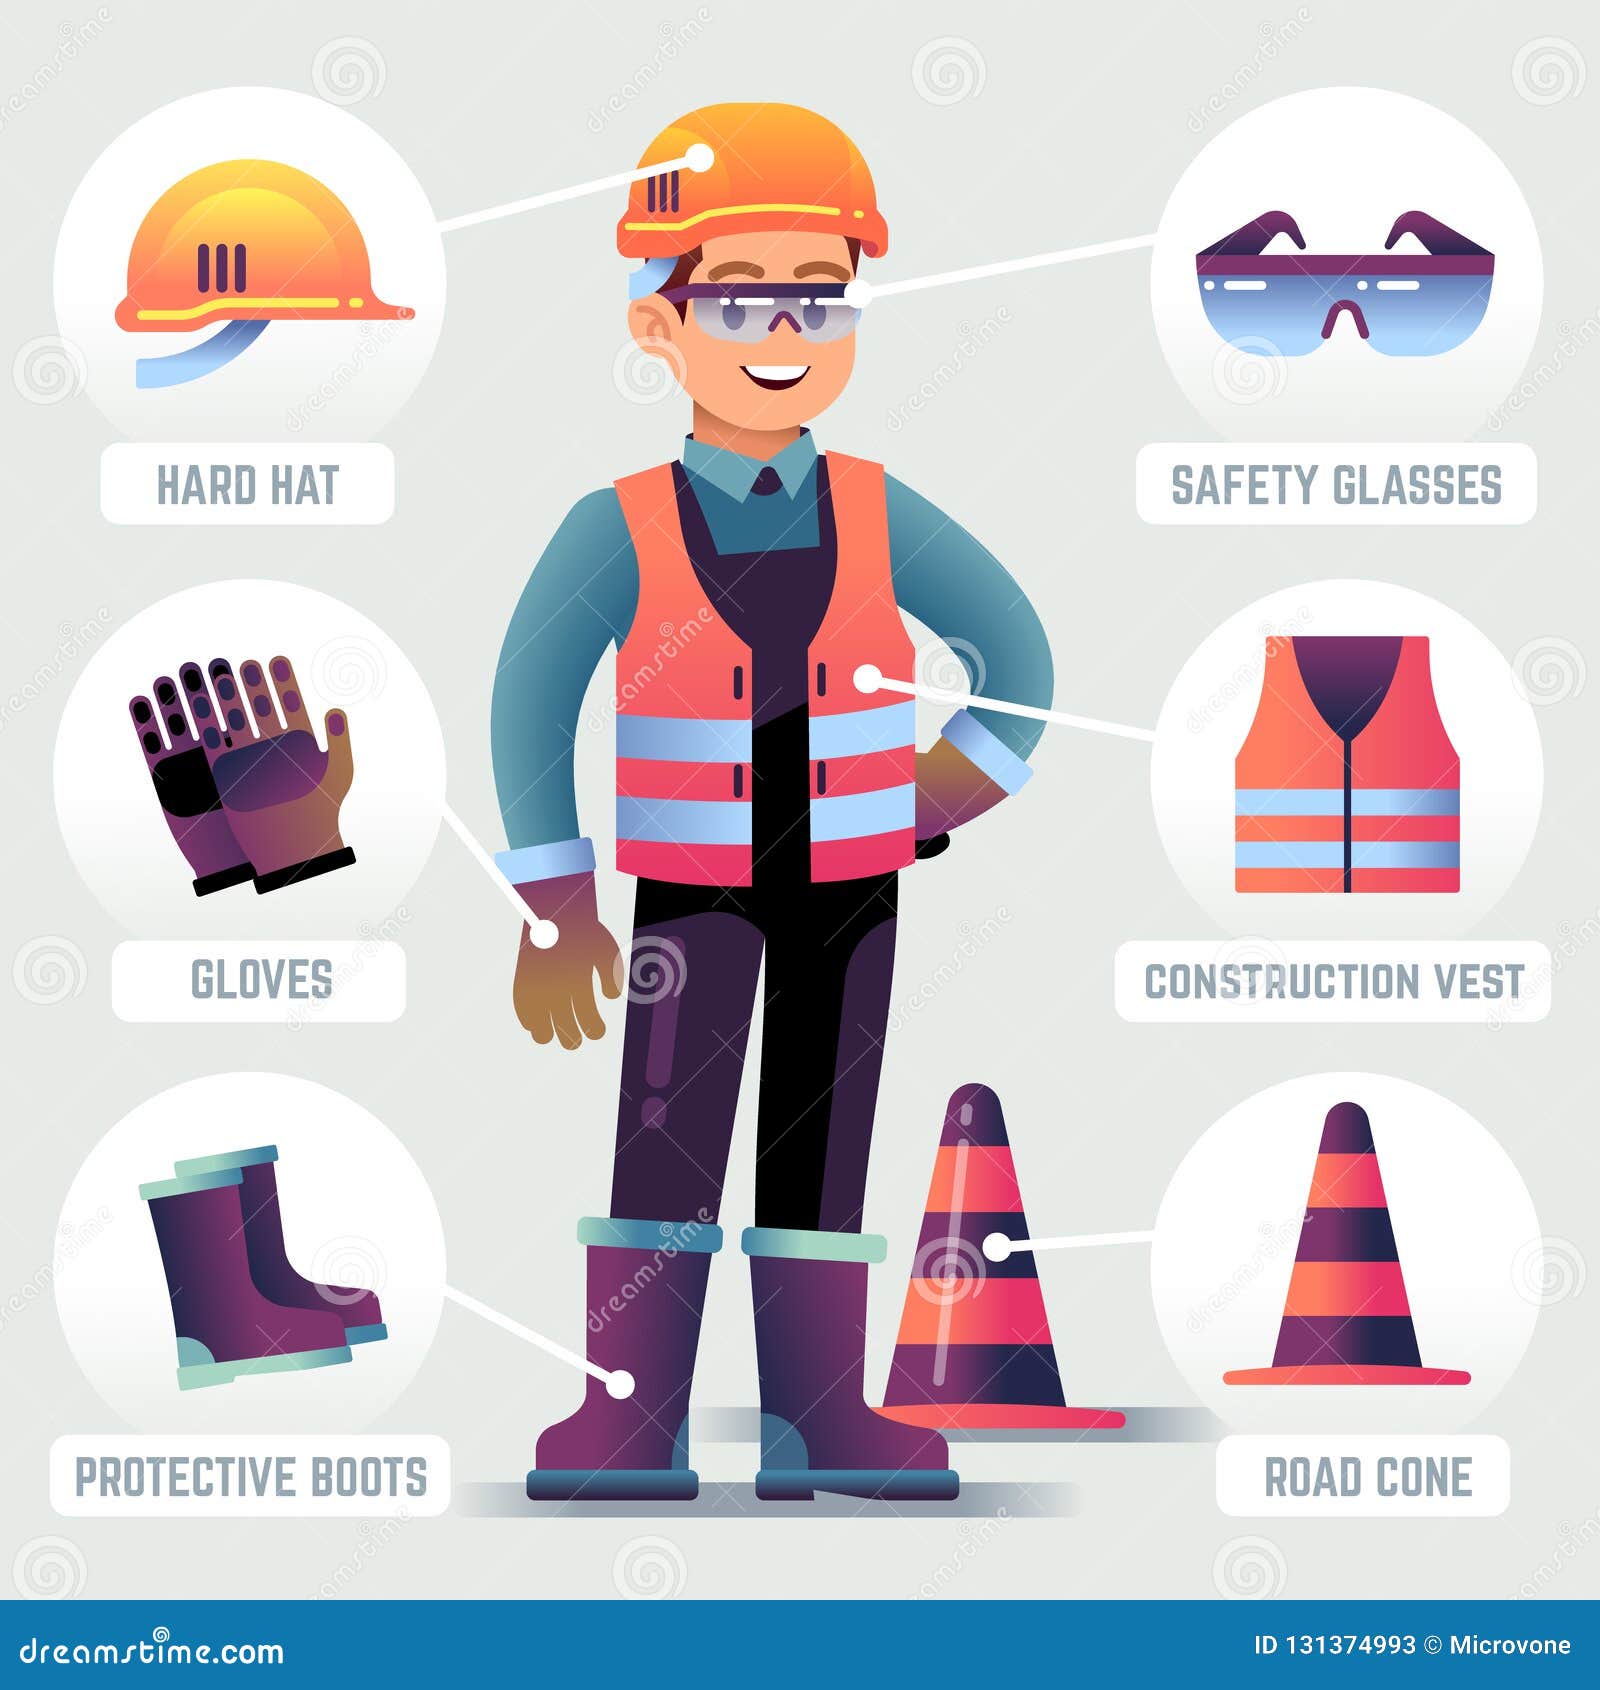 Construction Worker Wearing Safety Equipment Stock Illustrations